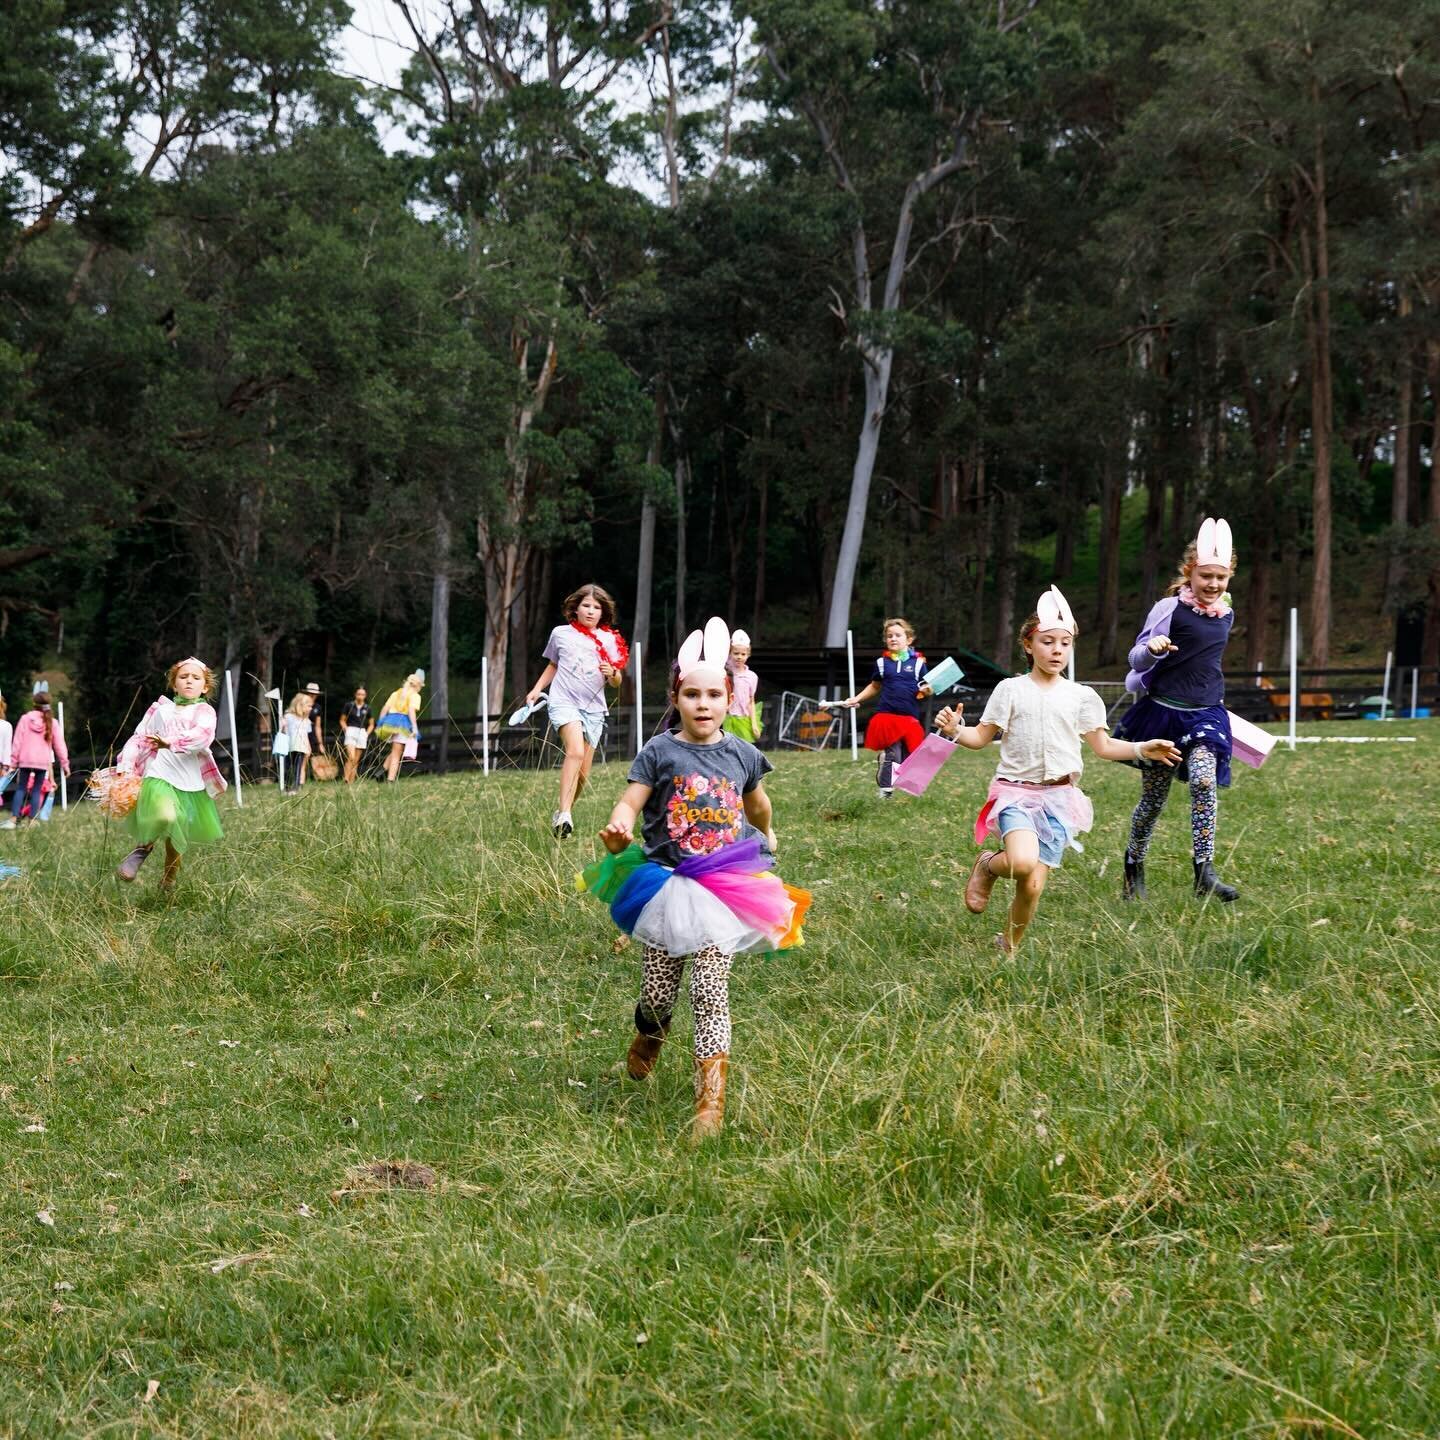 Our Easter Egg Hunt &amp; Pony Party was a fantastic day filled with pony pampering, carrot growing, and egg hunts galore! 🐰🍫
From grooming and painting ponies to spoon races and pi&ntilde;ata fun, every moment was brimming with laughter and joy. 
